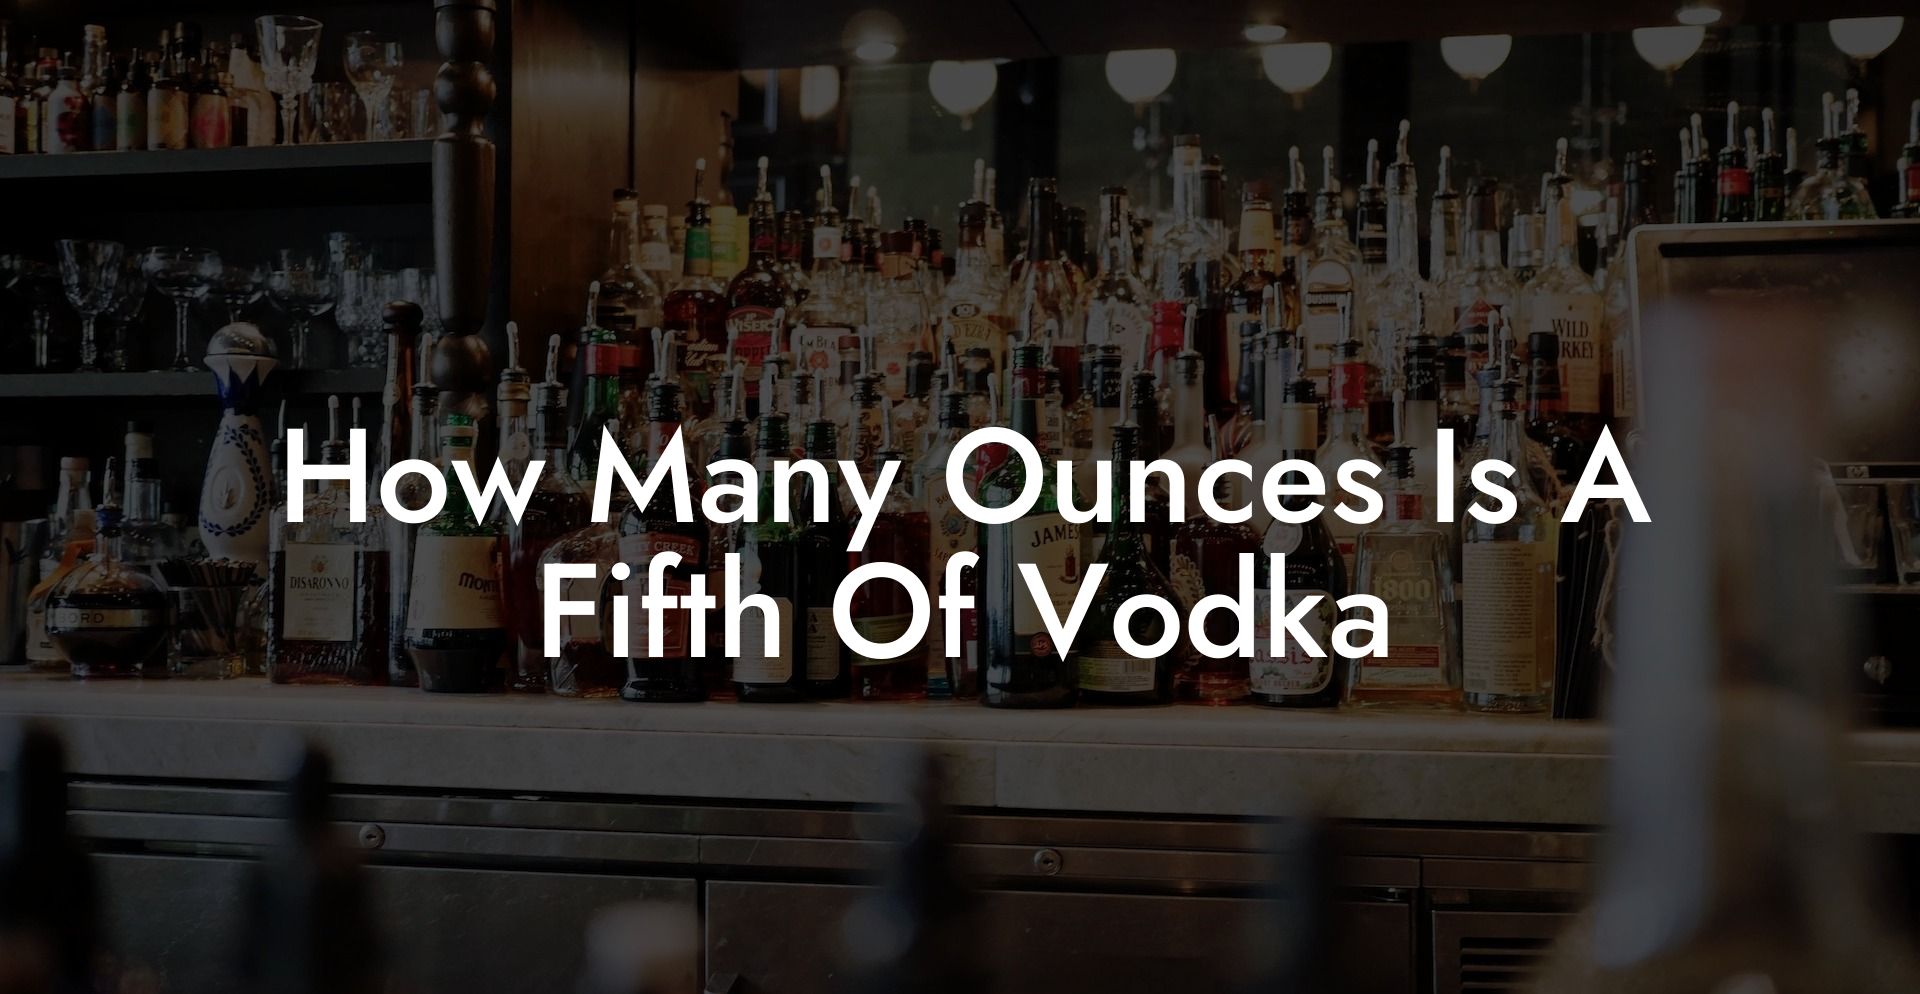 How Many Ounces Is A Fifth Of Vodka